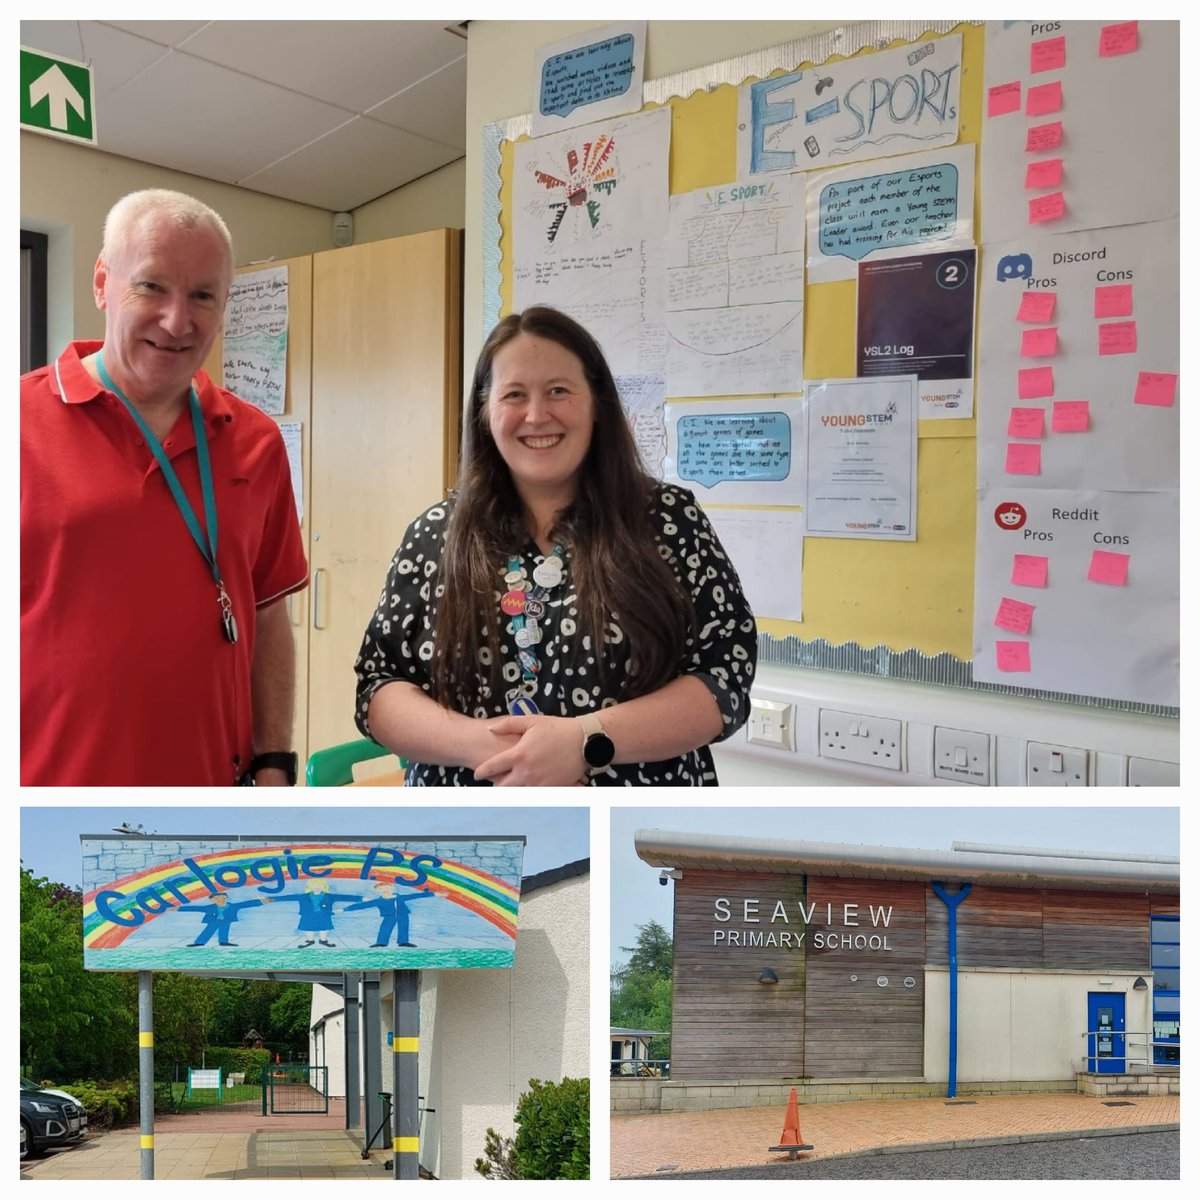 STEM-tastic day in @TayCollab visiting @IslaPrimarySch, @seaview_ps and @CarlogiePS to see exciting @EsportsAngus #IDL project in #partnership with @dundee_angus, @EsportsSCO & @MSEducationUK... all topped off with a visit to @BaldragonAcad to talk about #STEMnation! #LoveMyJob